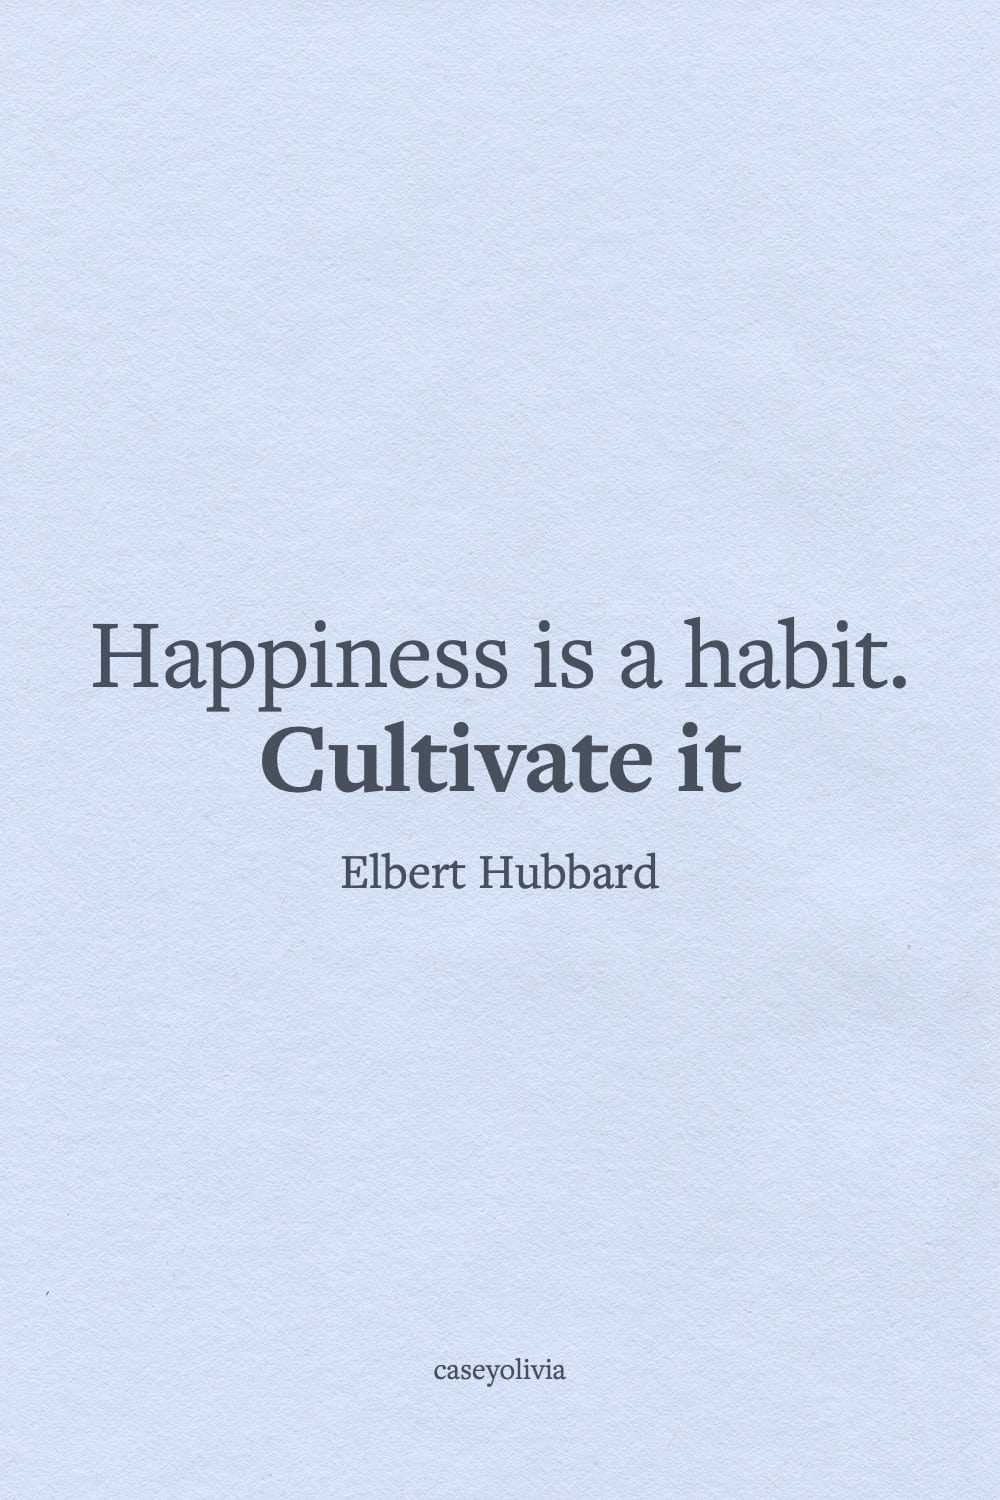 elbert hubbard happiness quote for inspiration